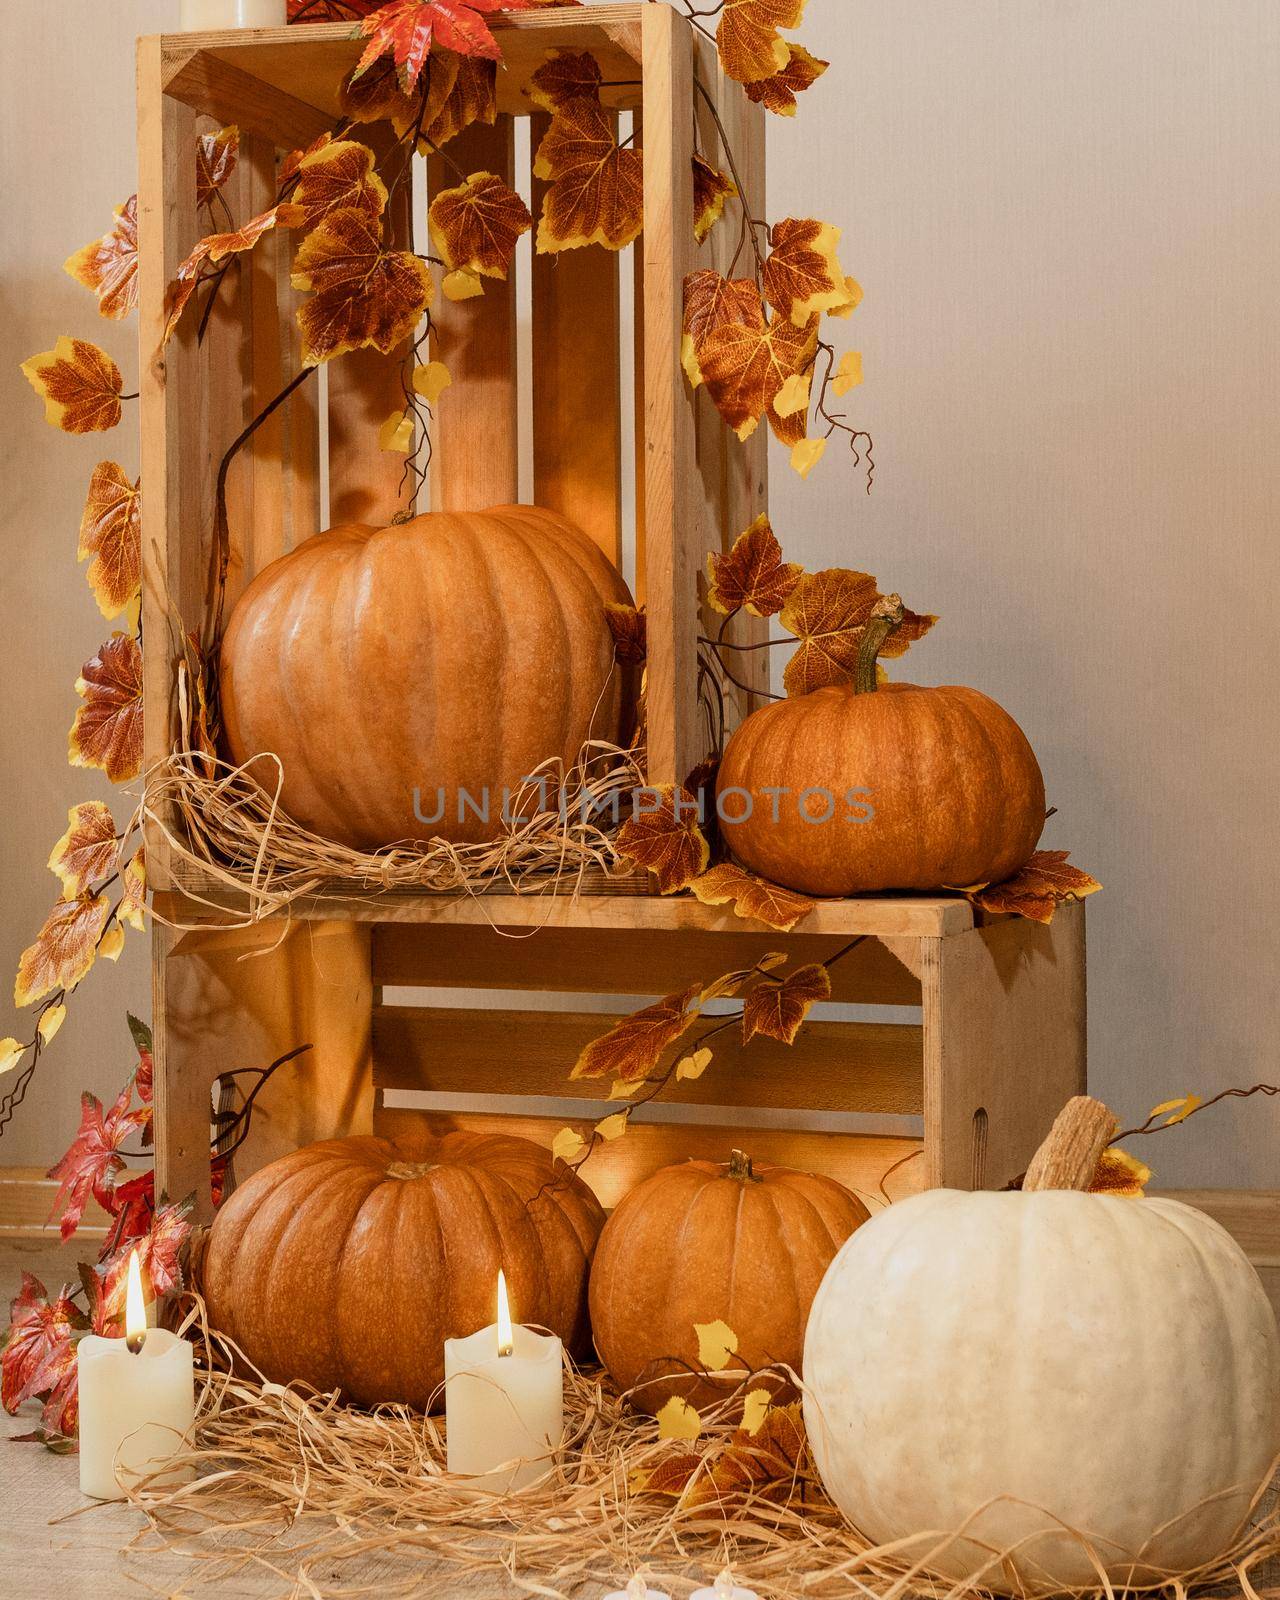 Halloween Pumpkins in the wooden crates with candles, straw, autumn leaves